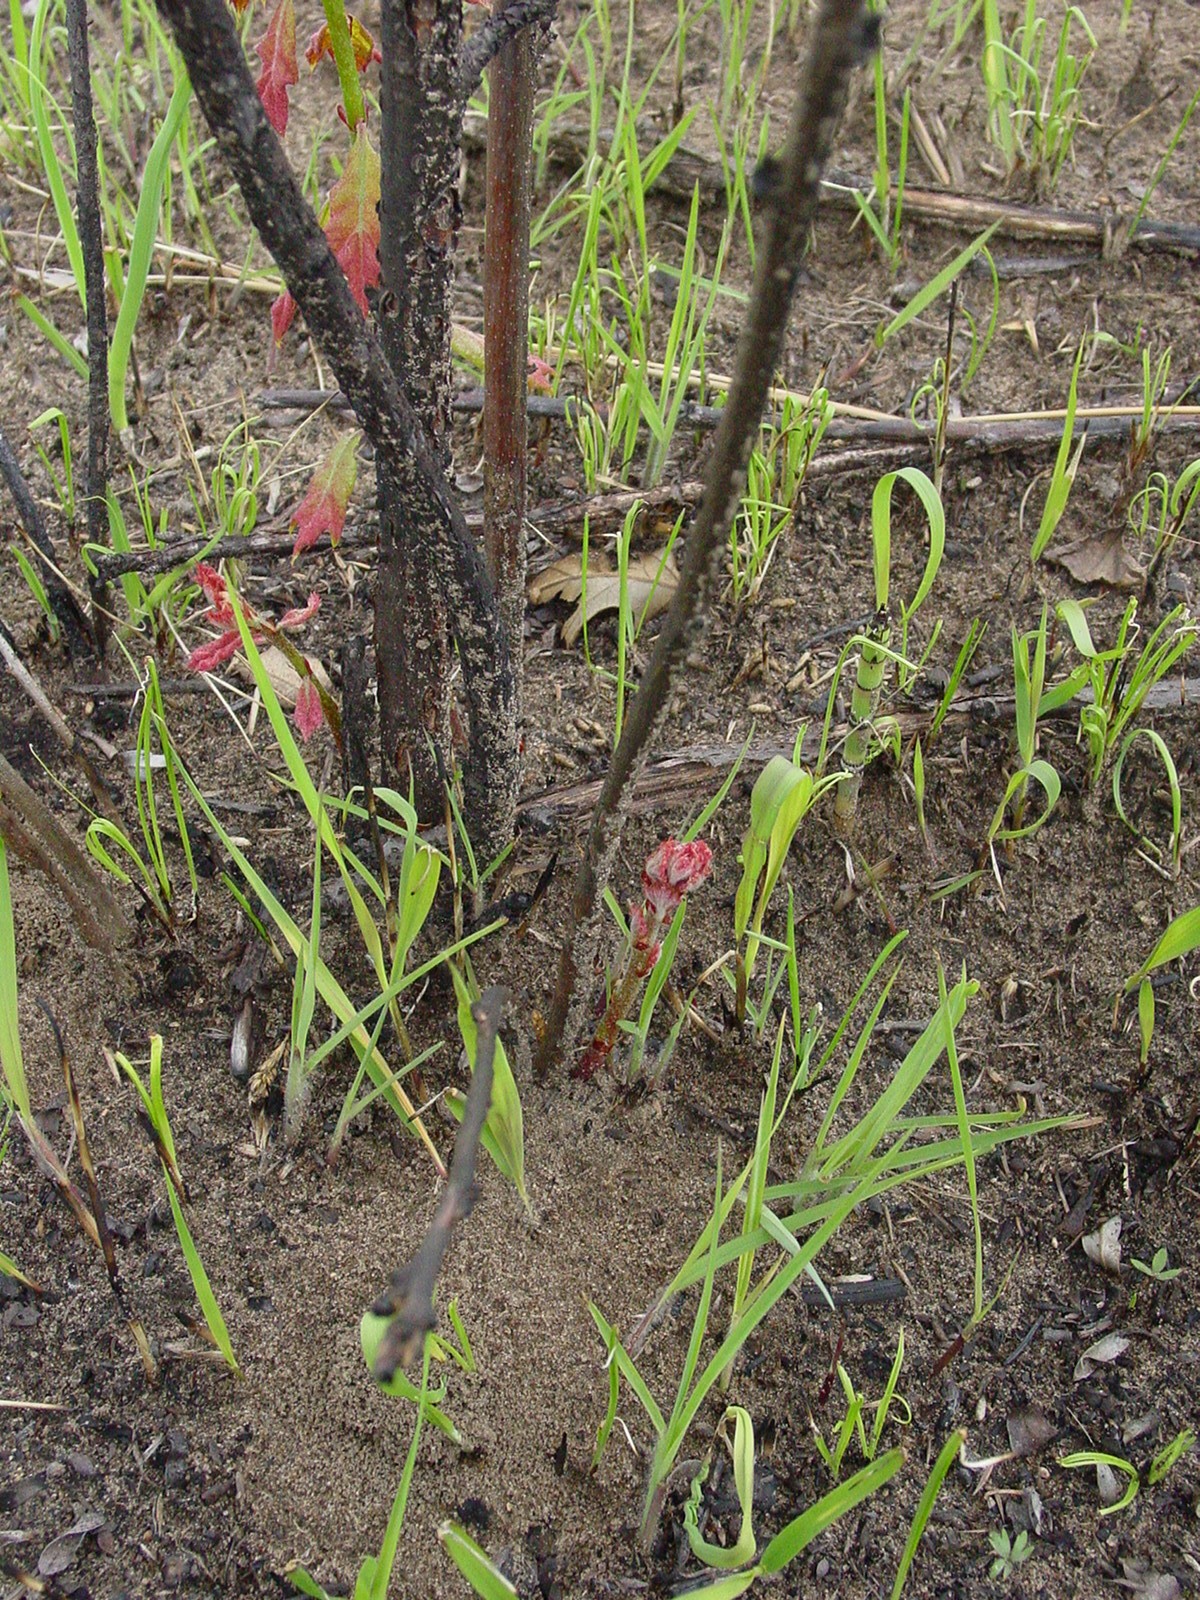 Understory resprouting after an experimental burn.